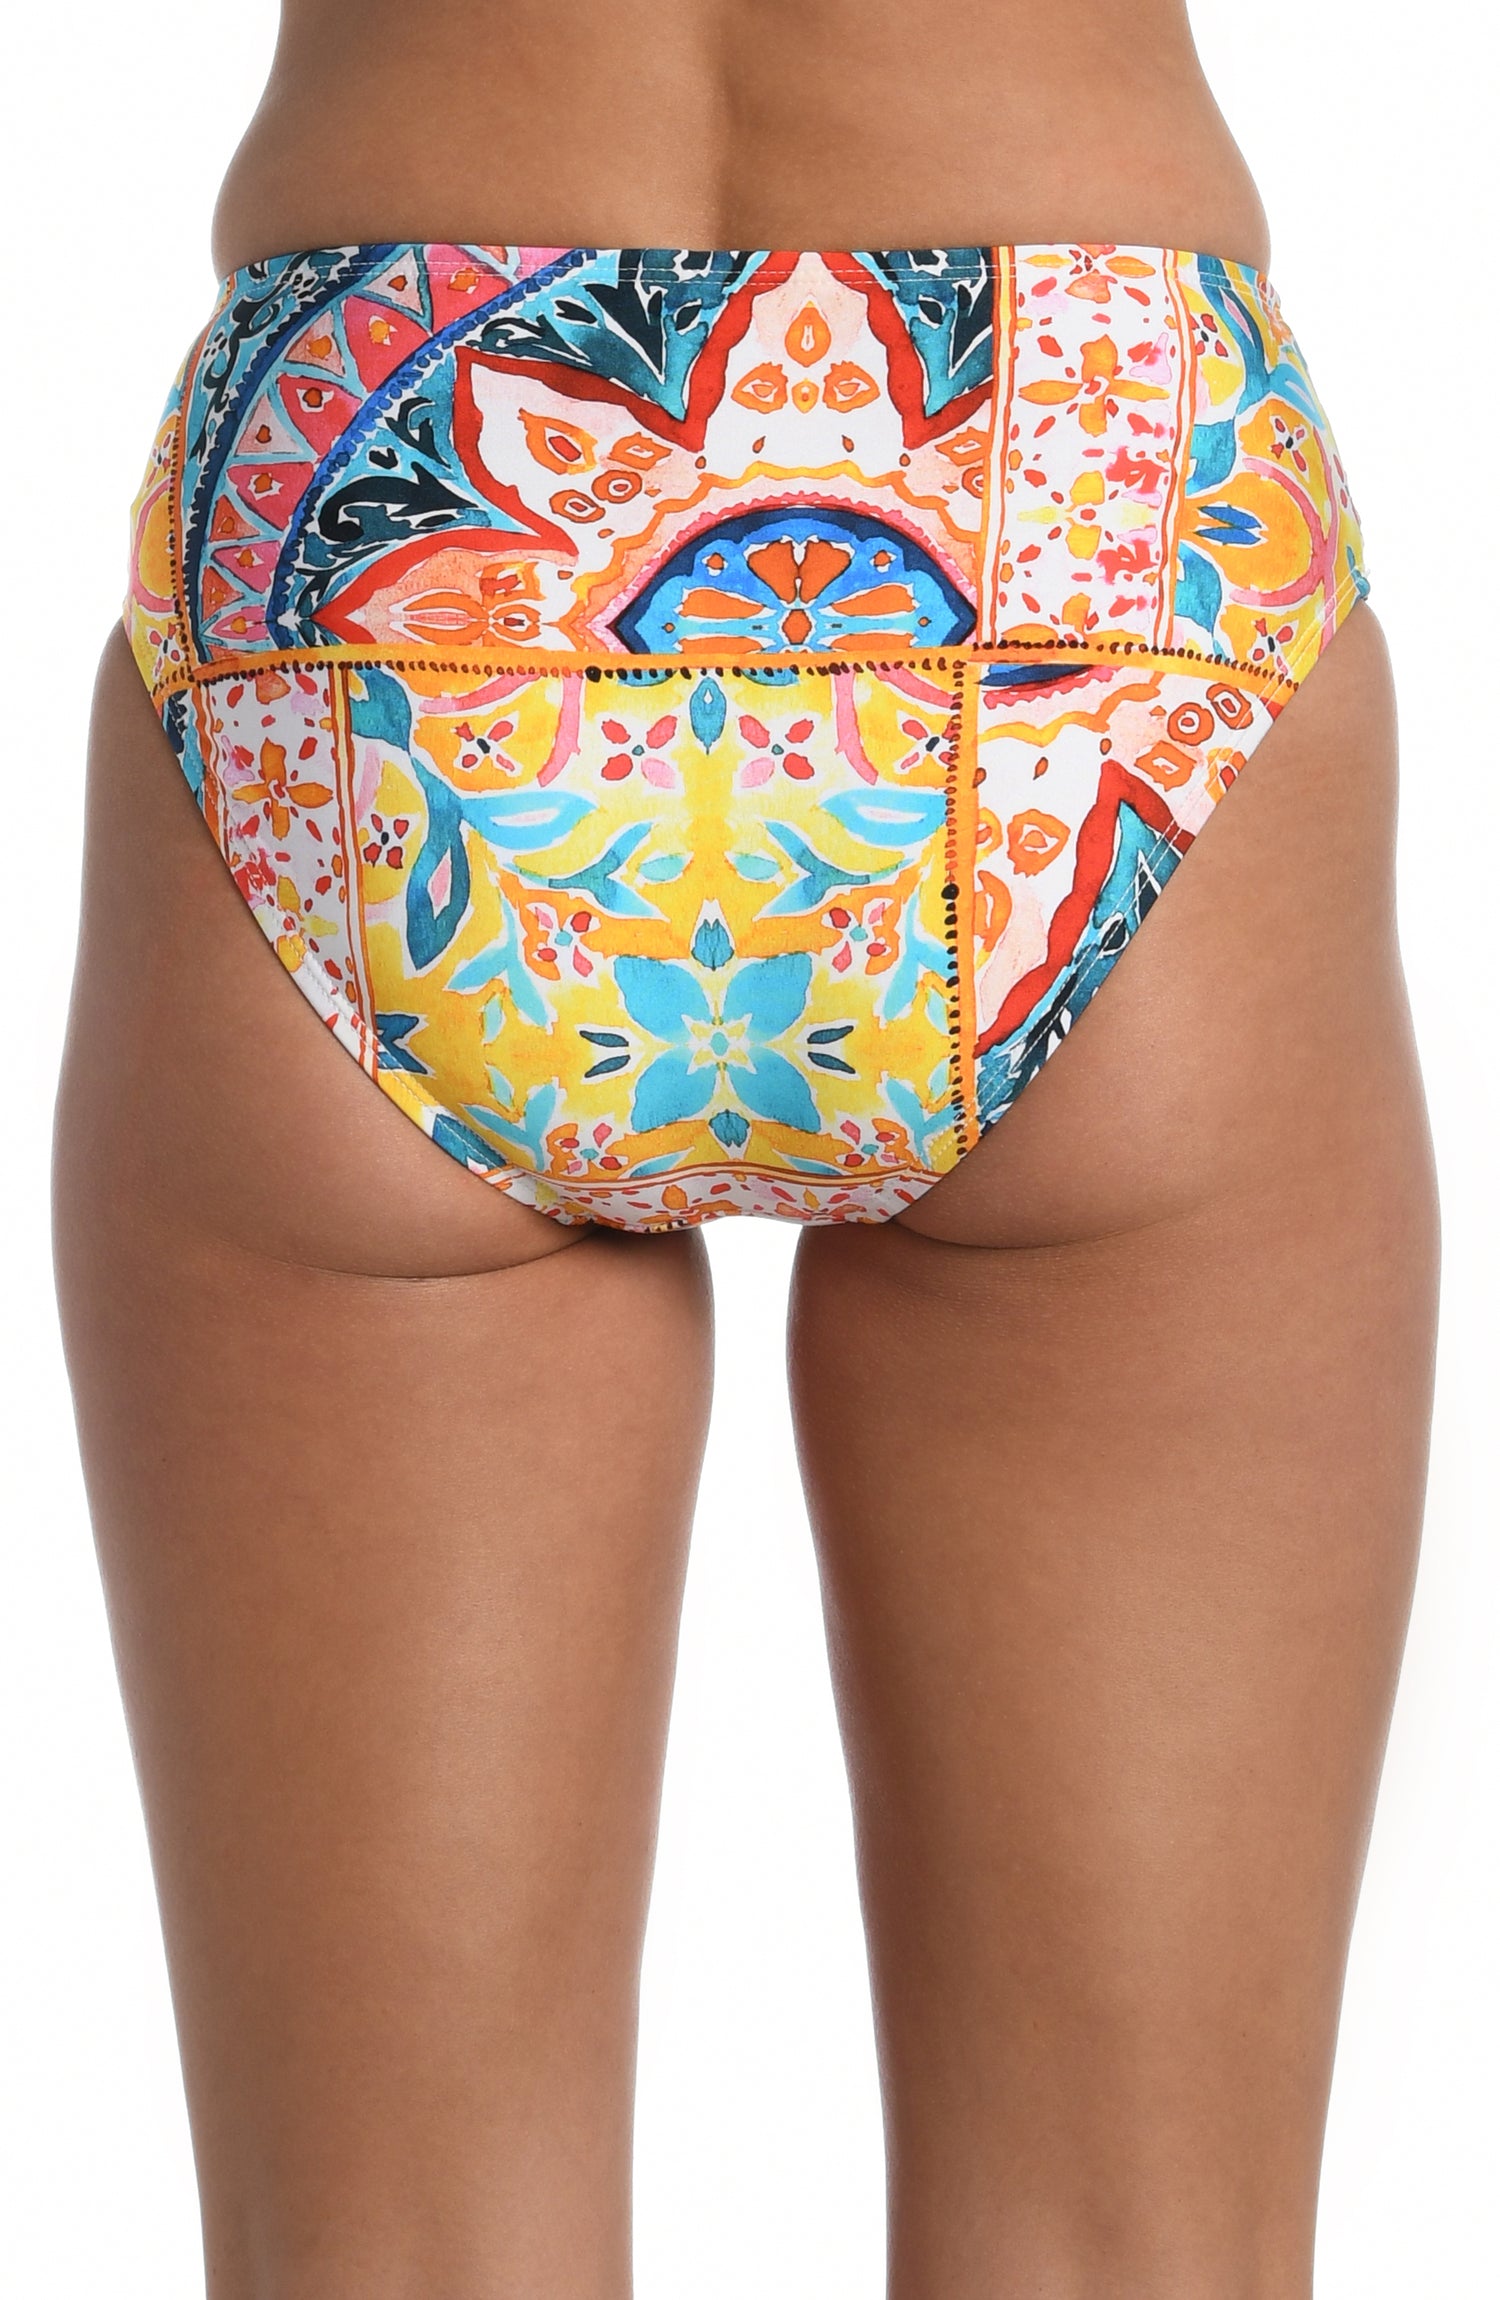 Model is wearing a moroccan inspired multi colored printed mid waist bottom from our Soleil collection!